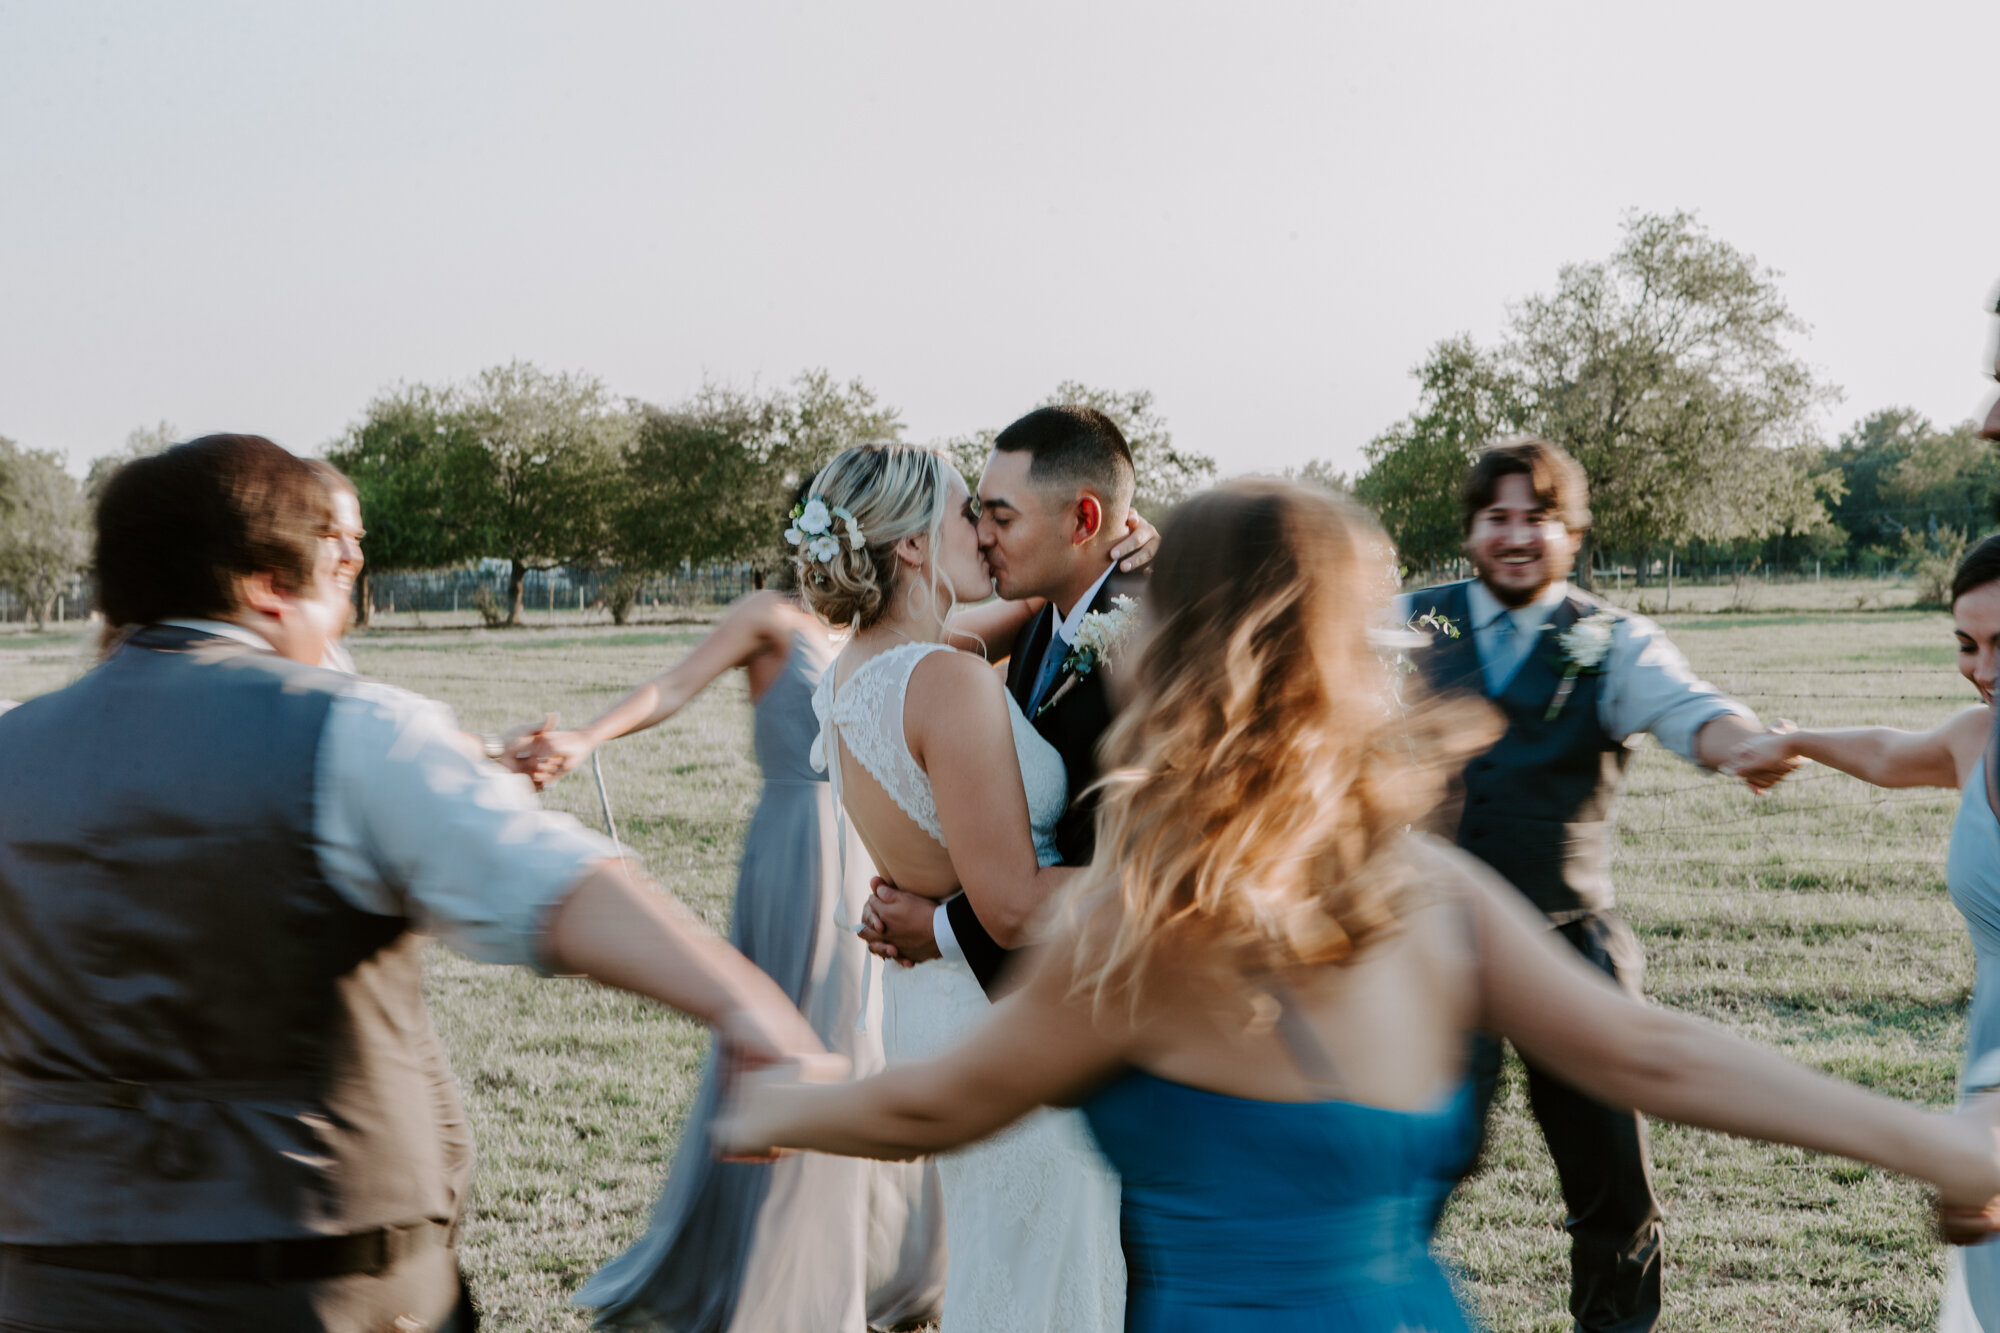 Bride and groom with bridal party merry-go-round portraits. Radiant Bohemian Hill Country Wedding at Gruene Estate in New Braunfels, TX